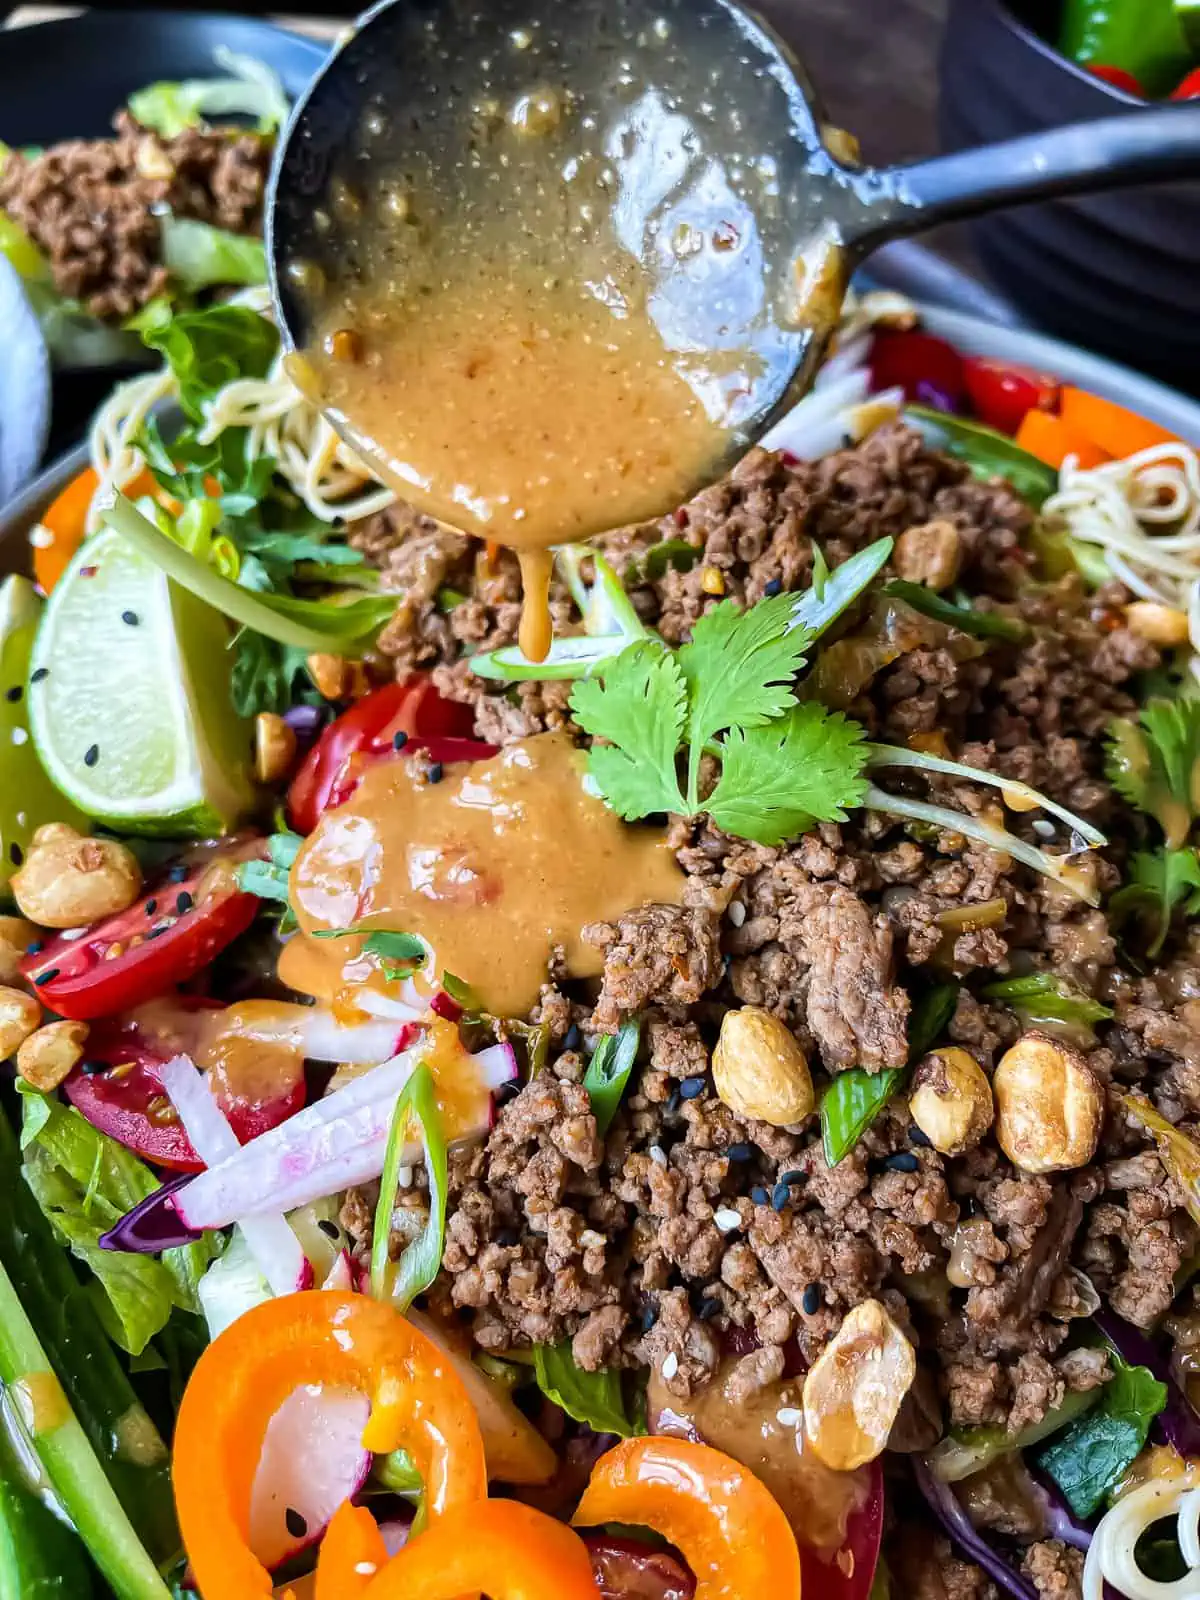 Thai beef salad with peanut dressing. Garnished with fresh veggies, rice noodles, sesame seeds, and extra peanuts